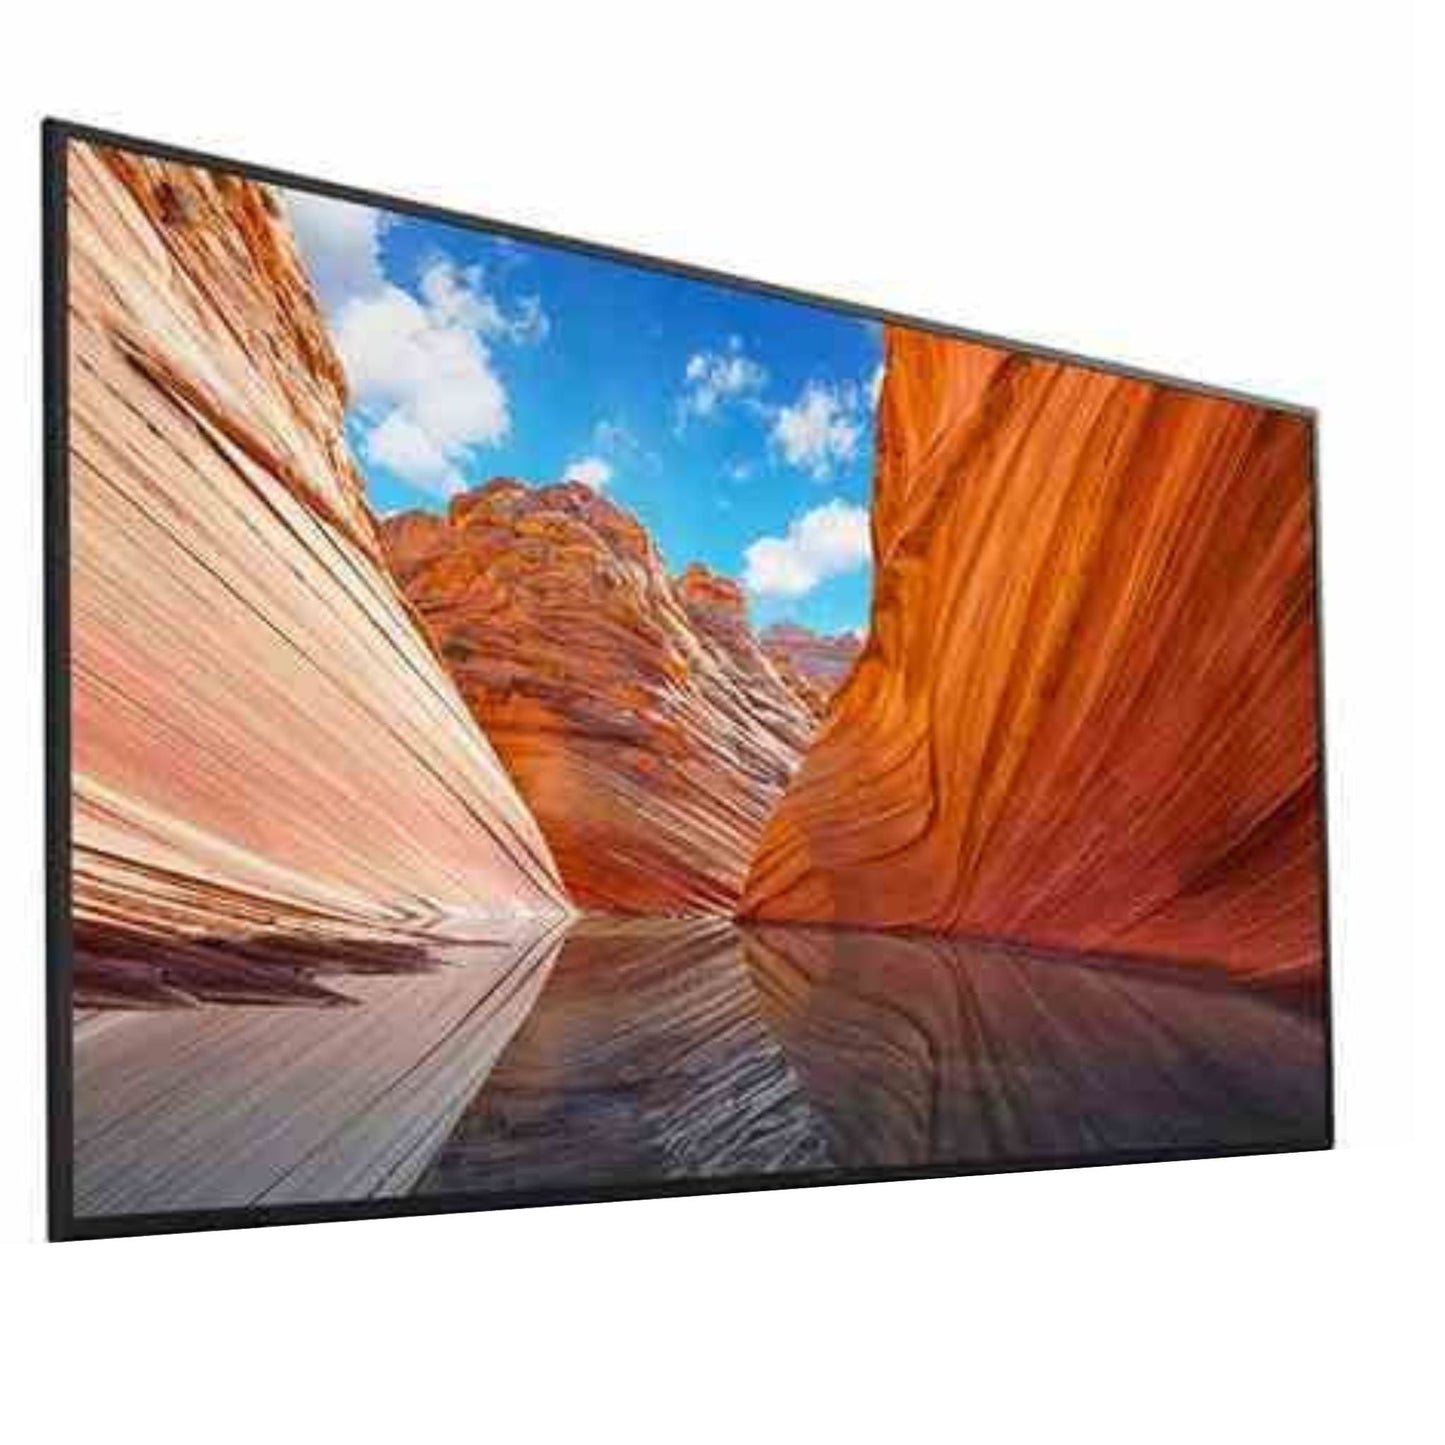 Sony 55 inch Smart Android TV, 55X85J